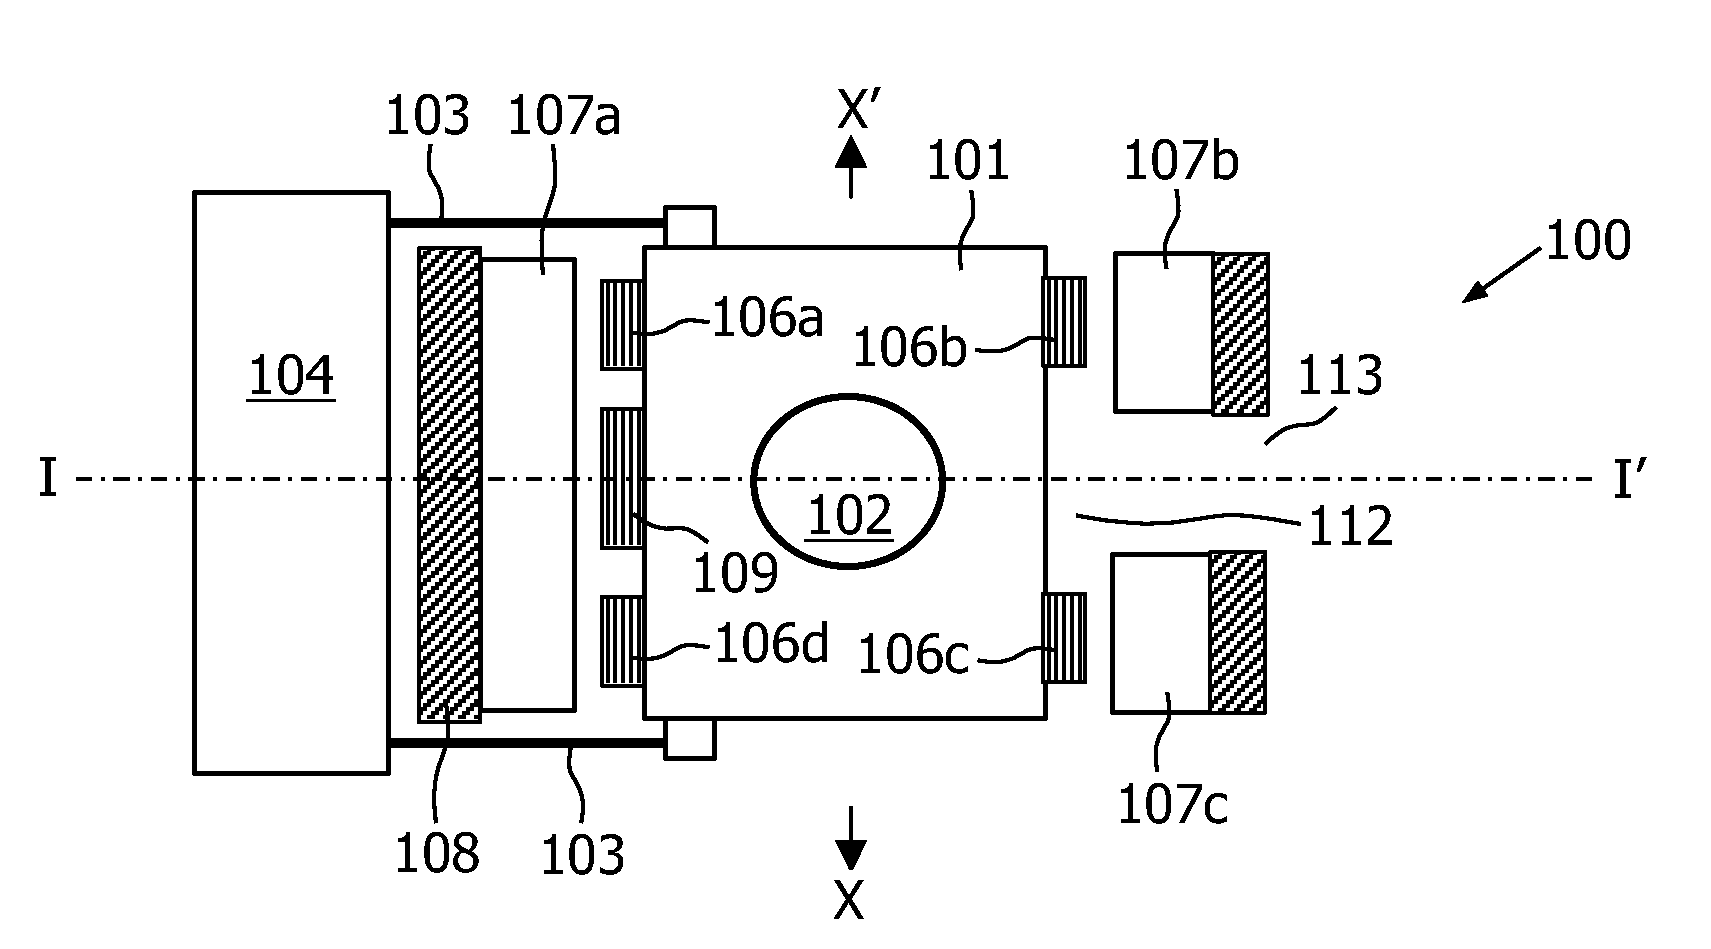 Optical Pickup Actuator and Optical Scanning Device